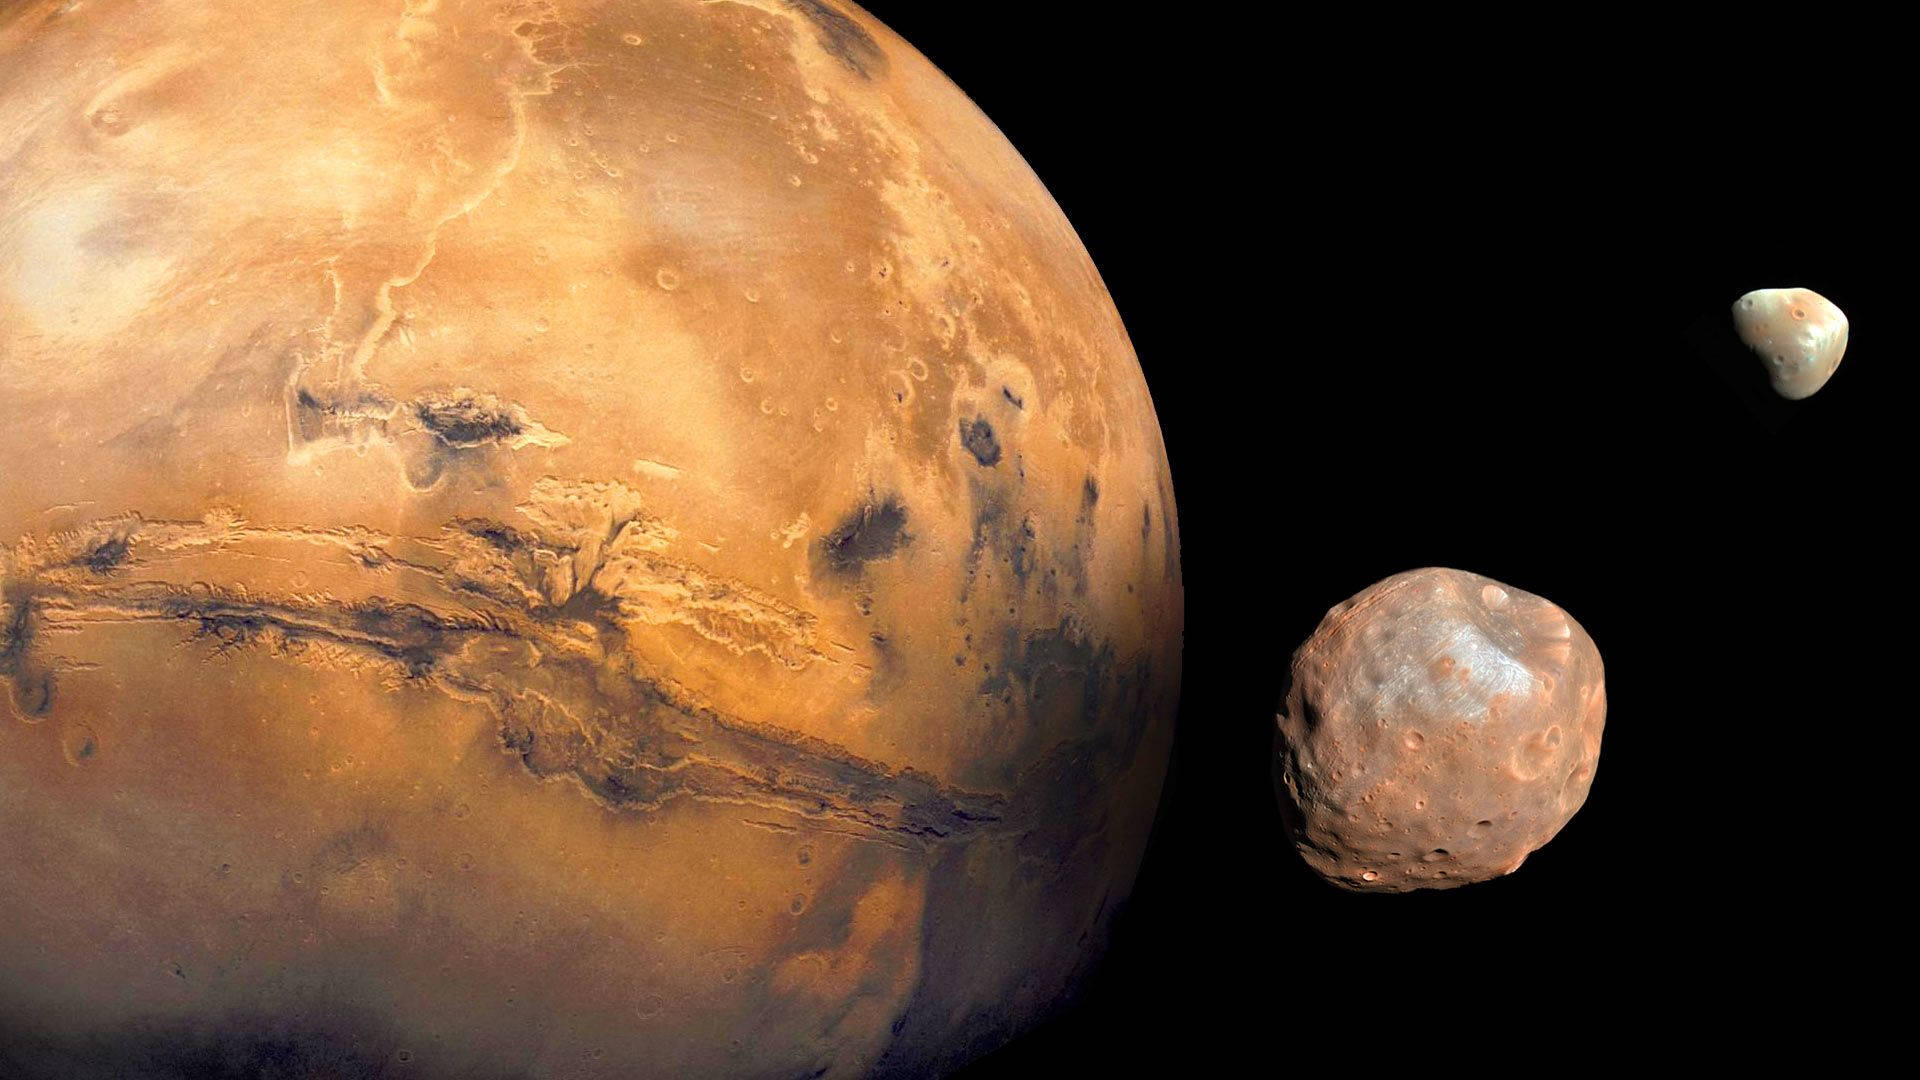 Mars: The Spectacular View of Phobos and Deimos Wallpaper